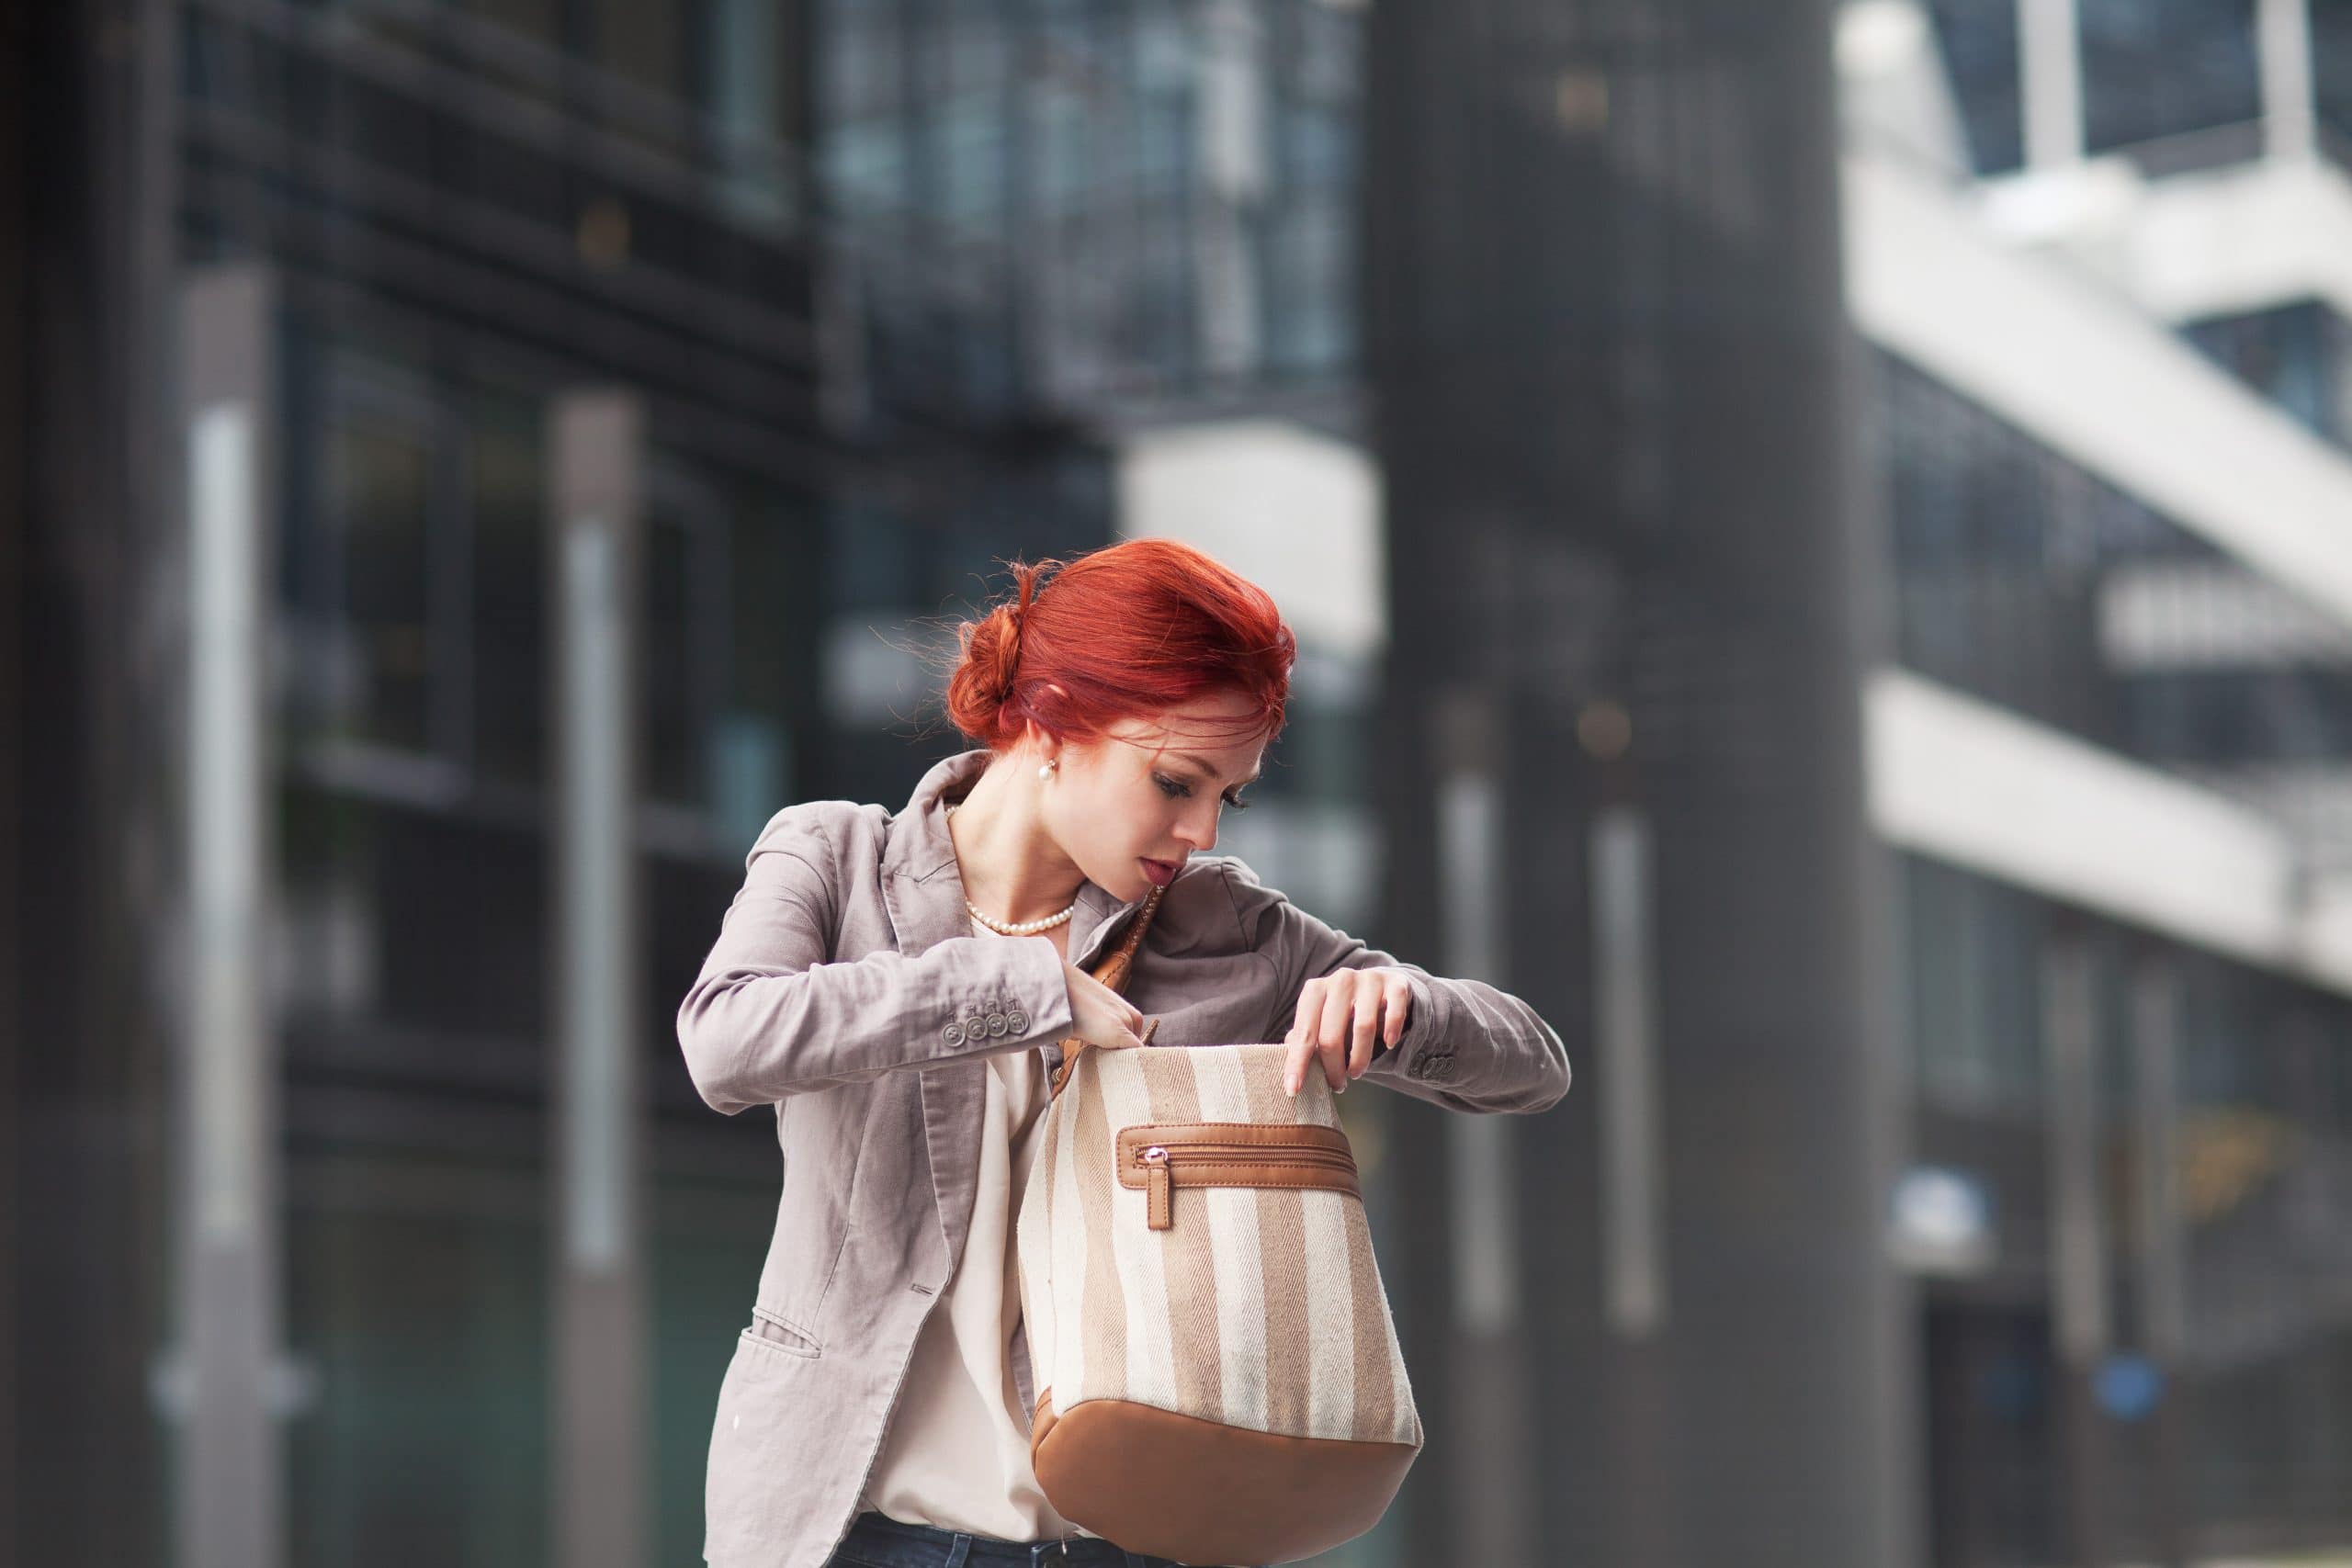 a woman with red hair carrying a purse